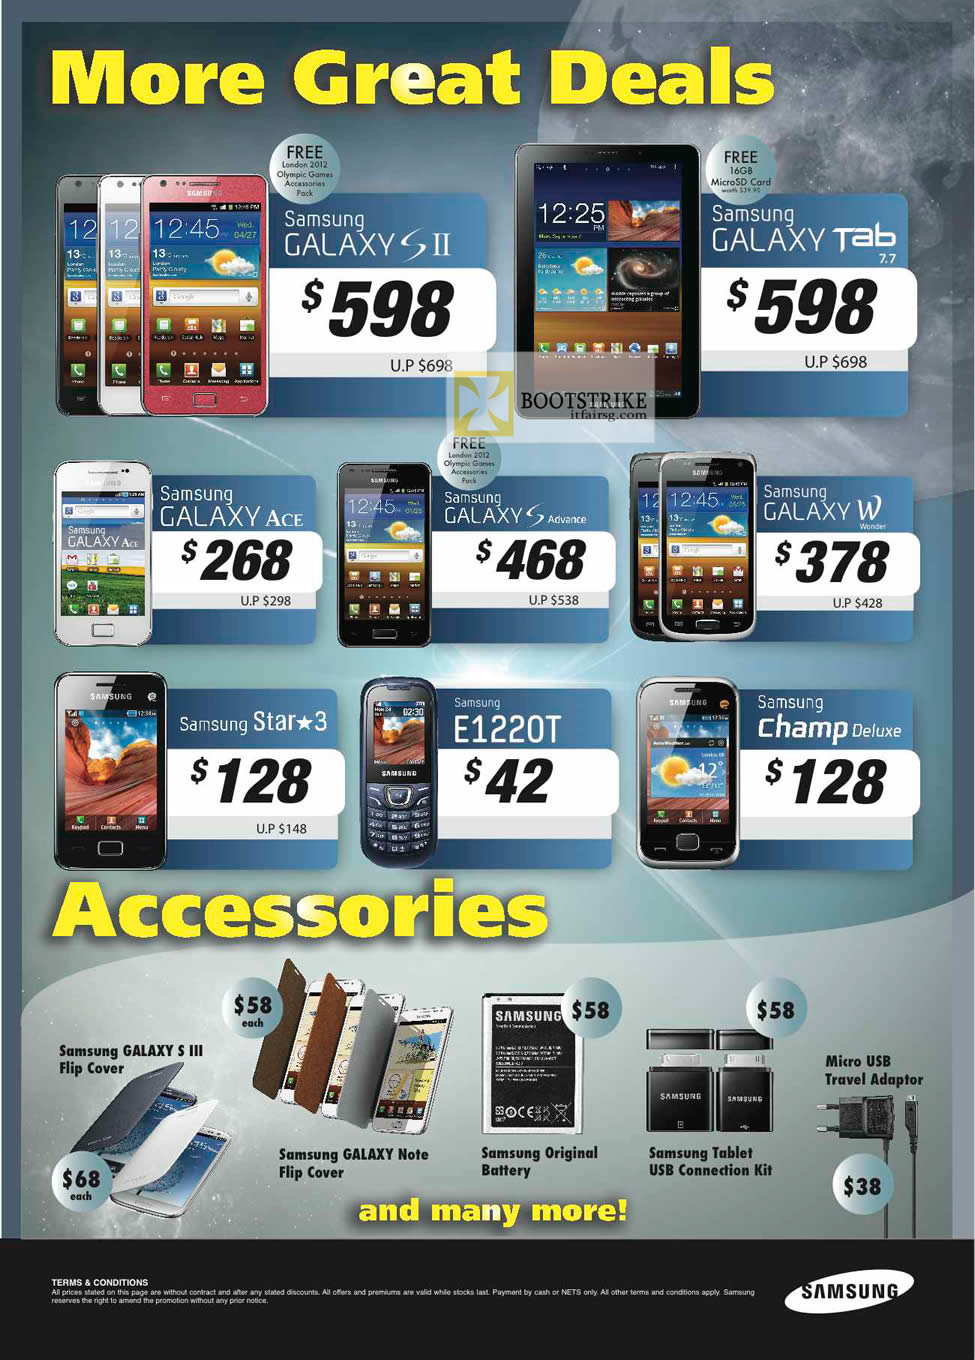 COMEX 2012 price list image brochure of Samsung Mobile Phones Galaxy S II, Tab 7.7, Ace, S Advance, W, Star 3, E1220T, Champ Deluxe, Accessories